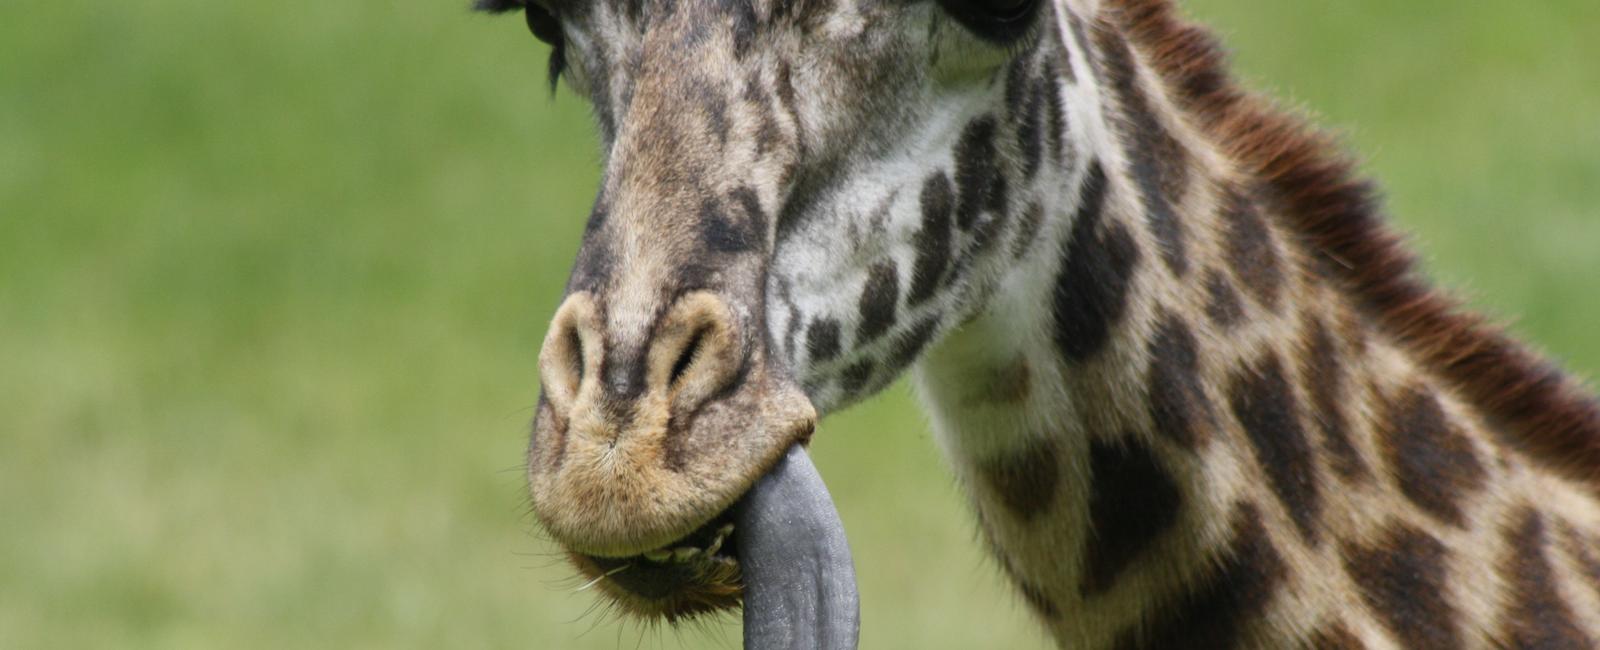 A giraffes tongue is what color black